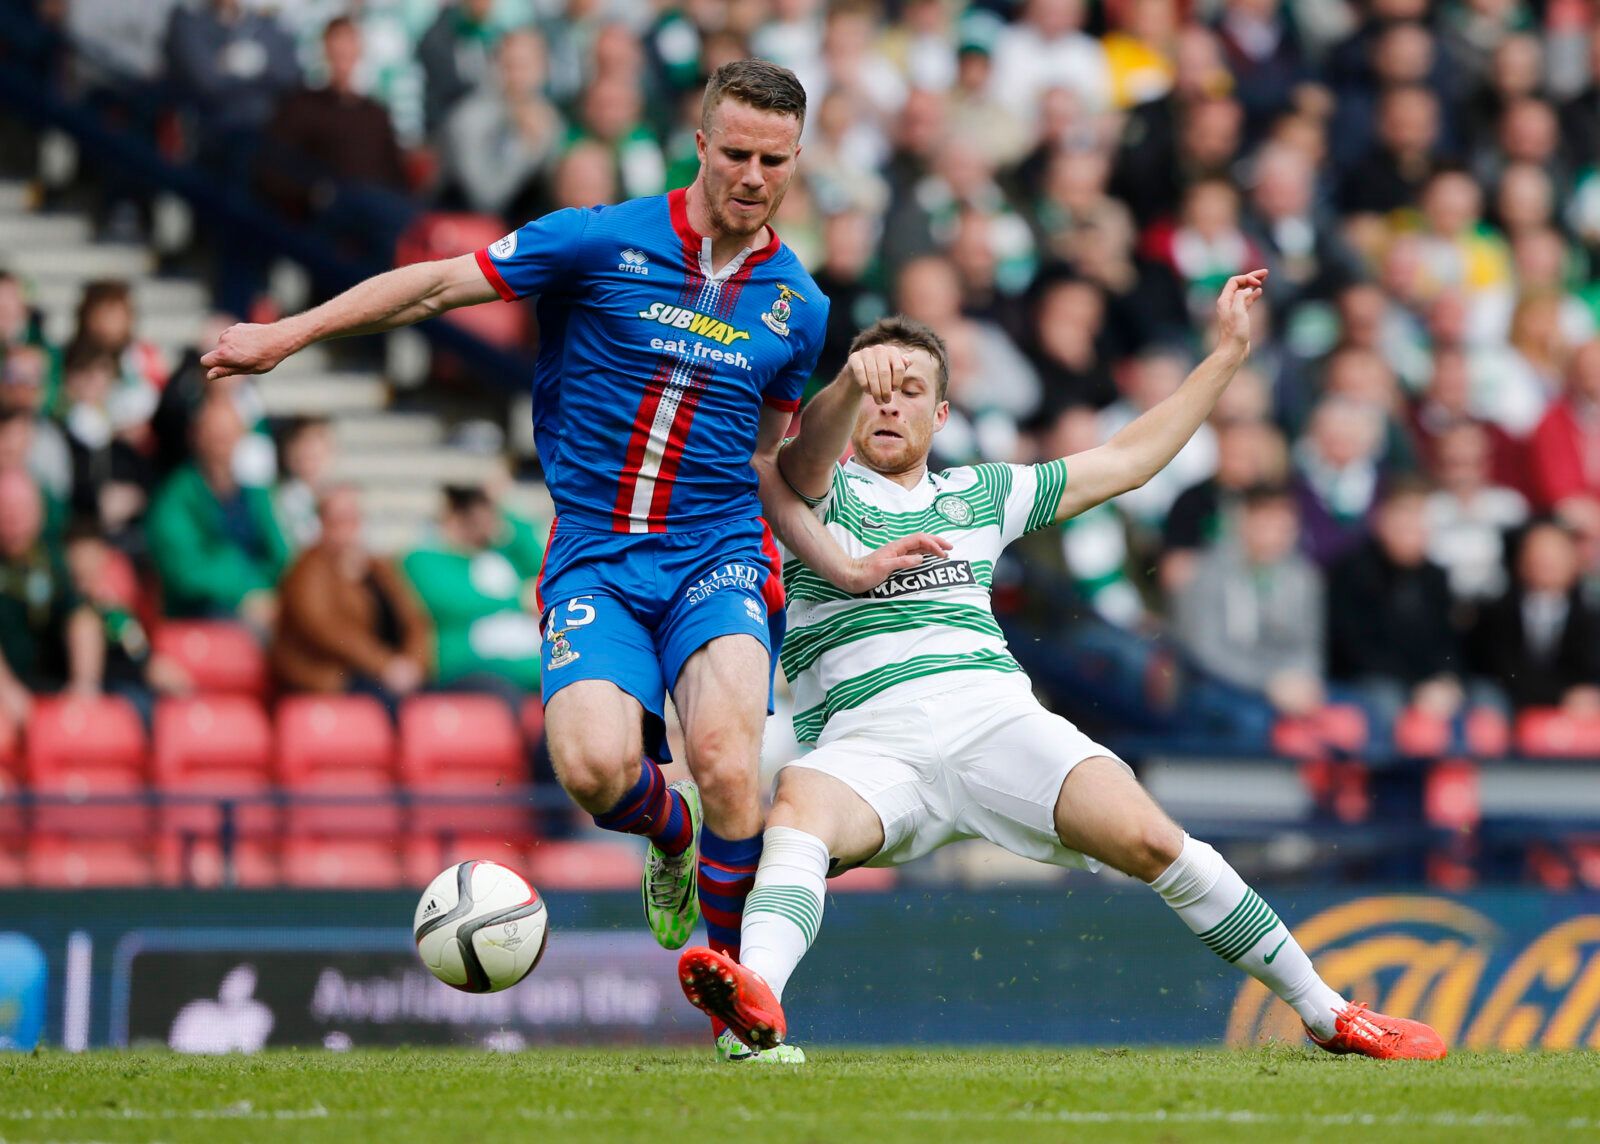 Football - Inverness Caledonian Thistle v Celtic - William Hill Scottish FA Cup Semi Final - Hampden Park, Glasgow, Scotland - 19/4/15
Inverness' Marley Watkins in action with Celtic's Adam Matthews 
Reuters / Russell Cheyne
Livepic
EDITORIAL USE ONLY. No use with unauthorized audio, video, data, fixture lists, club/league logos or 